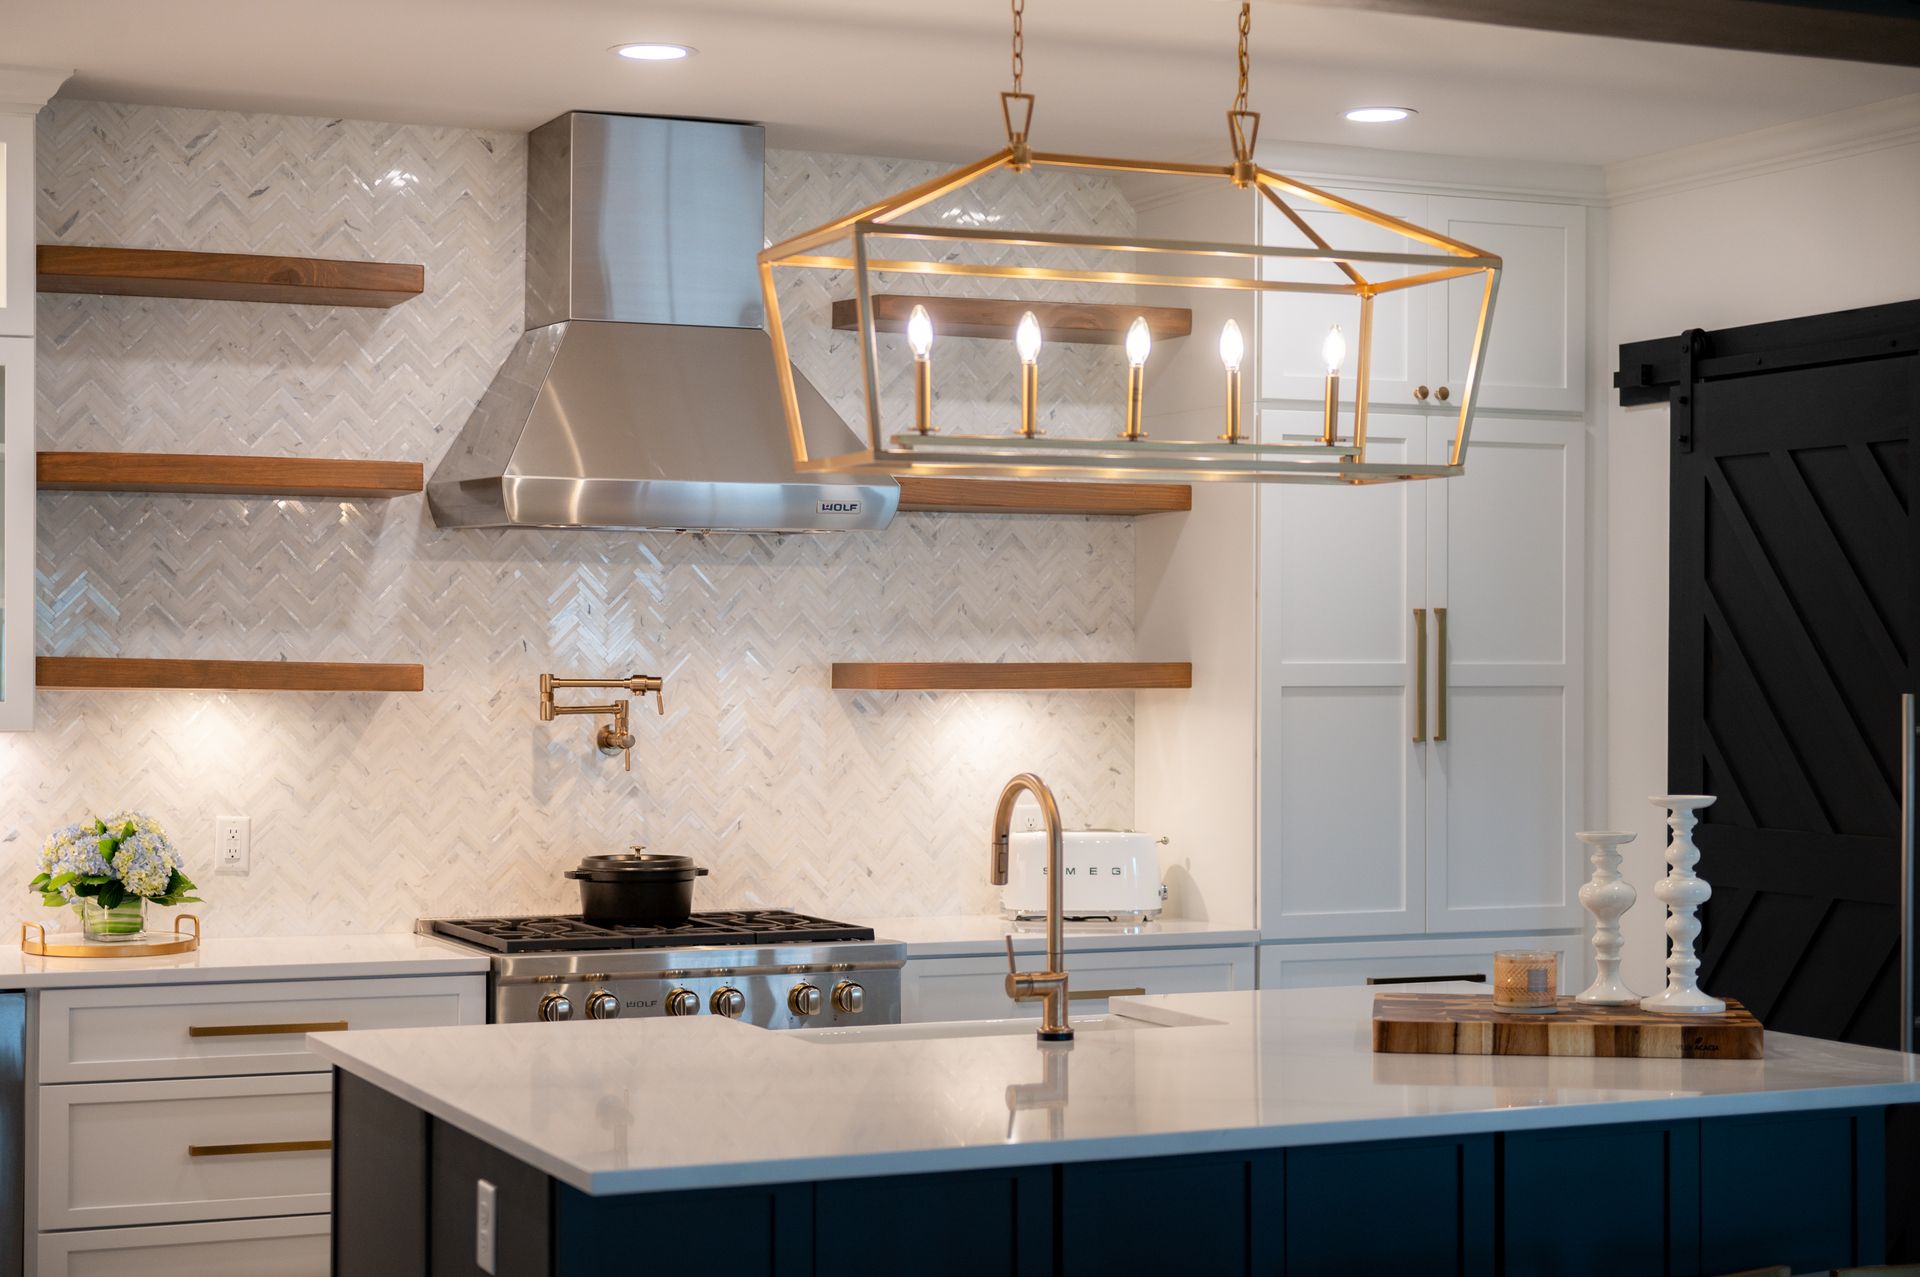 Residential Contractors in Baton Rouge: Choosing the Best Place for Your Range During a Kitchen Reno